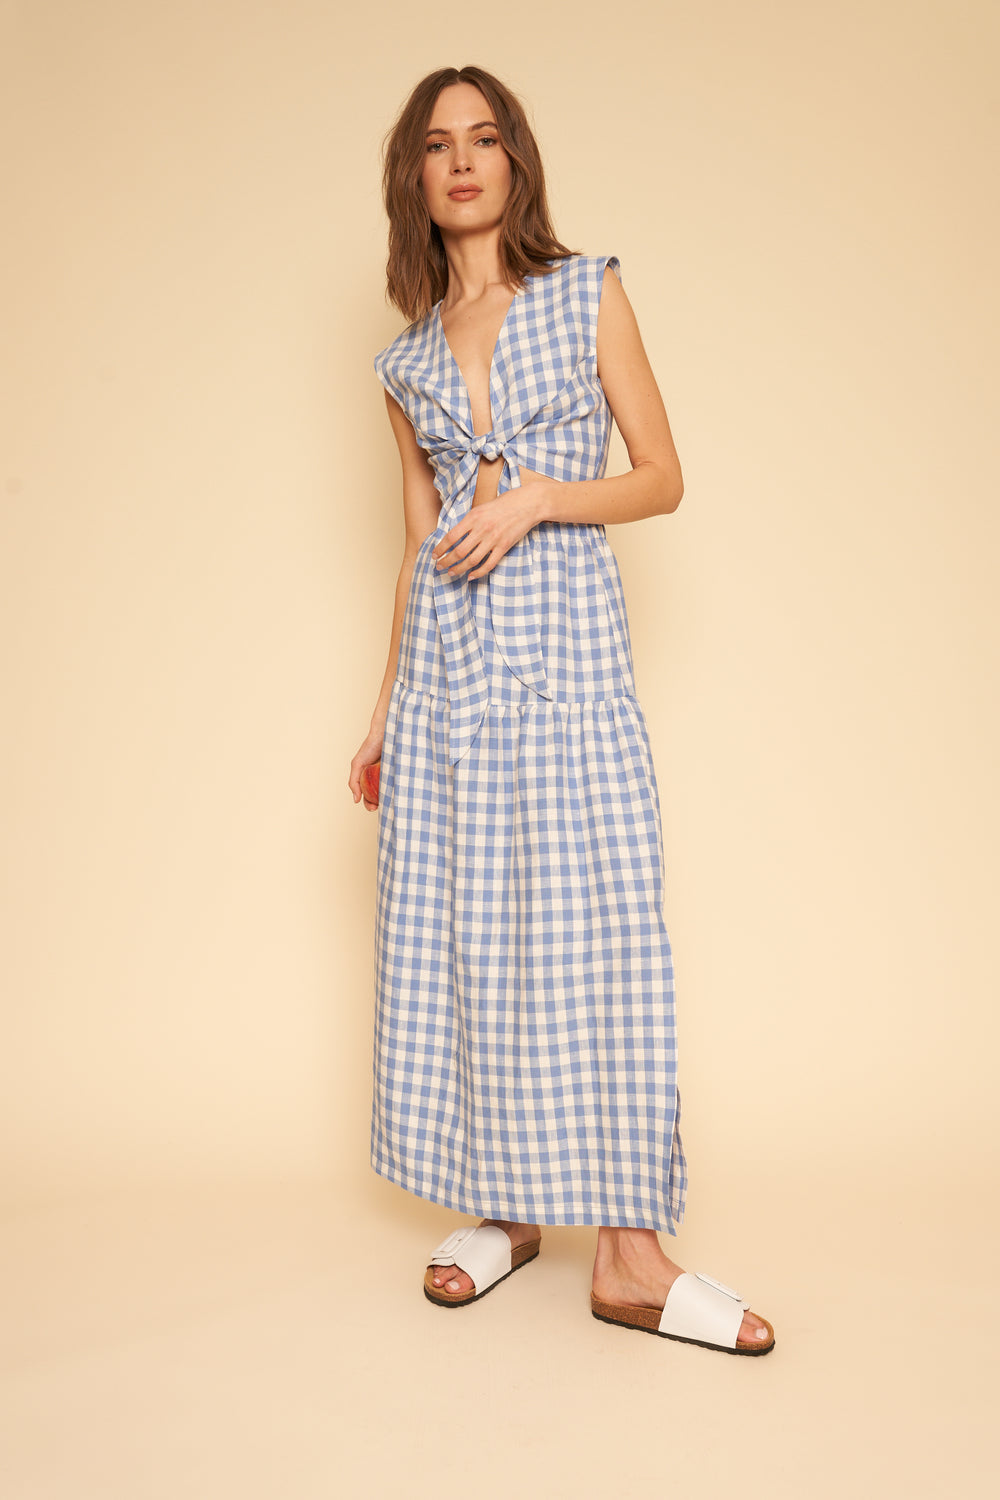 Valentina Top in Blue Gingham Linen - Whimsy & Row